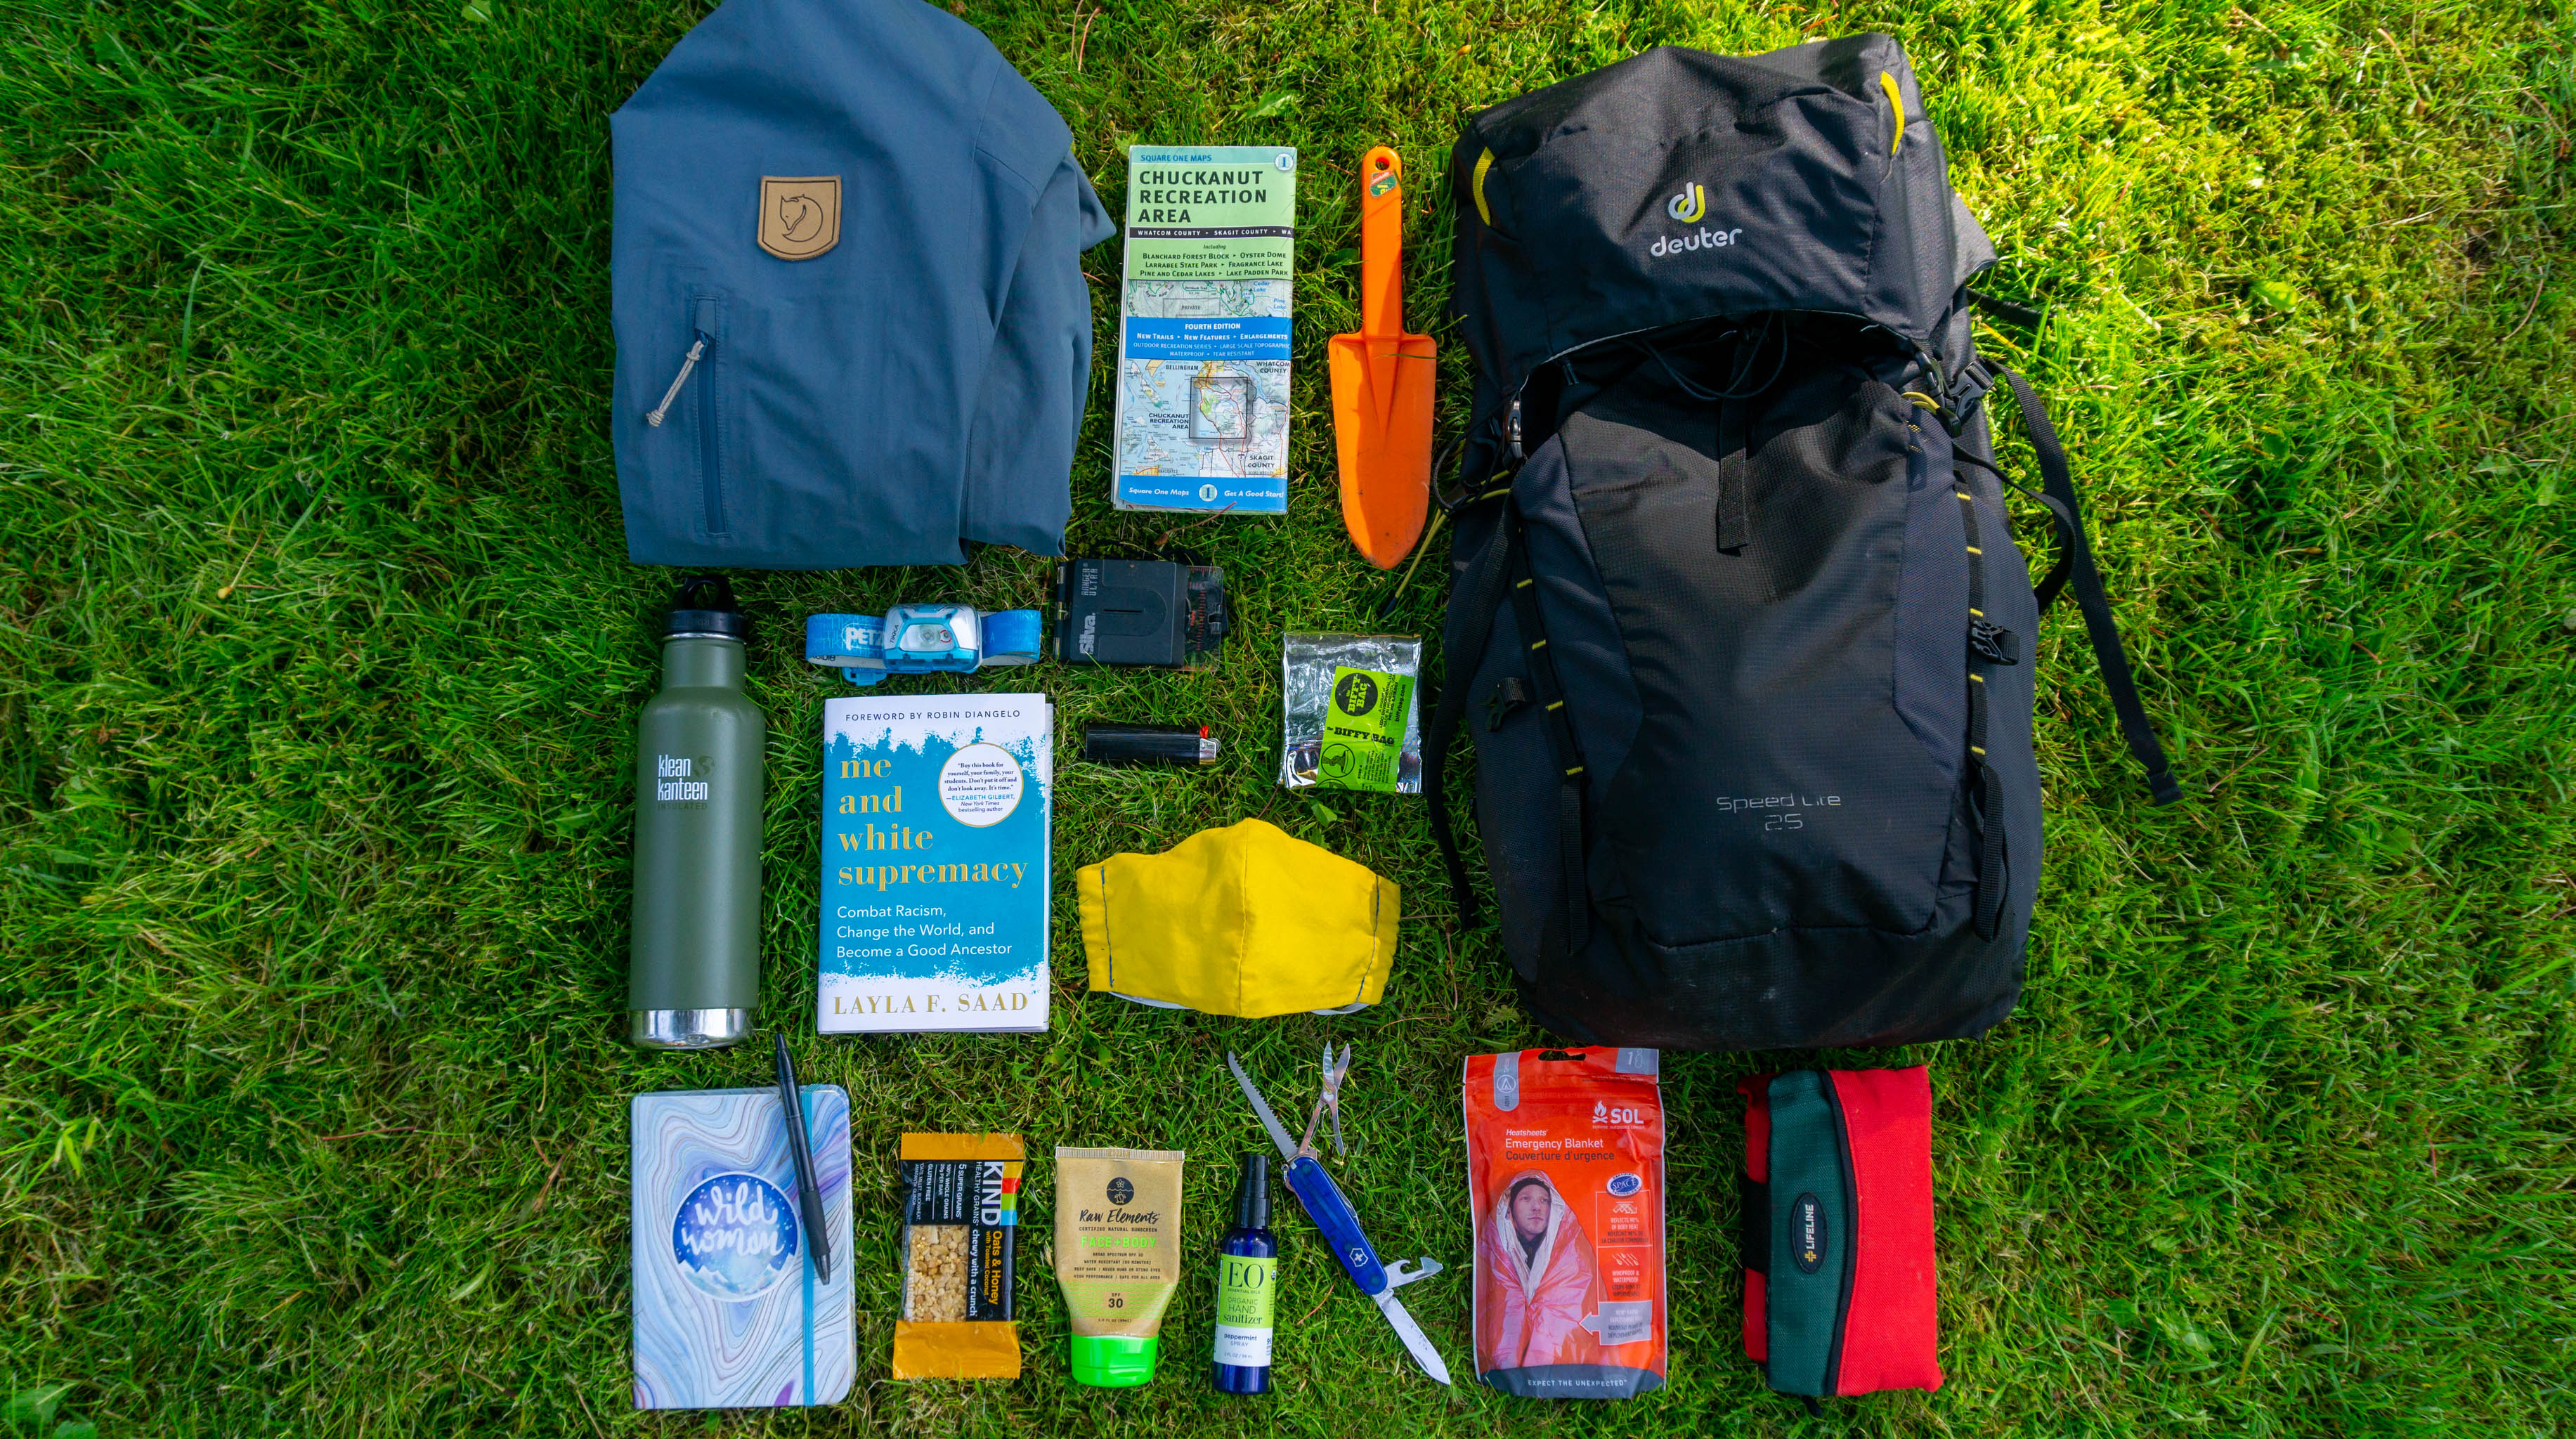 The Best Guide To The 10 Hiking Essentials: What To Pack For